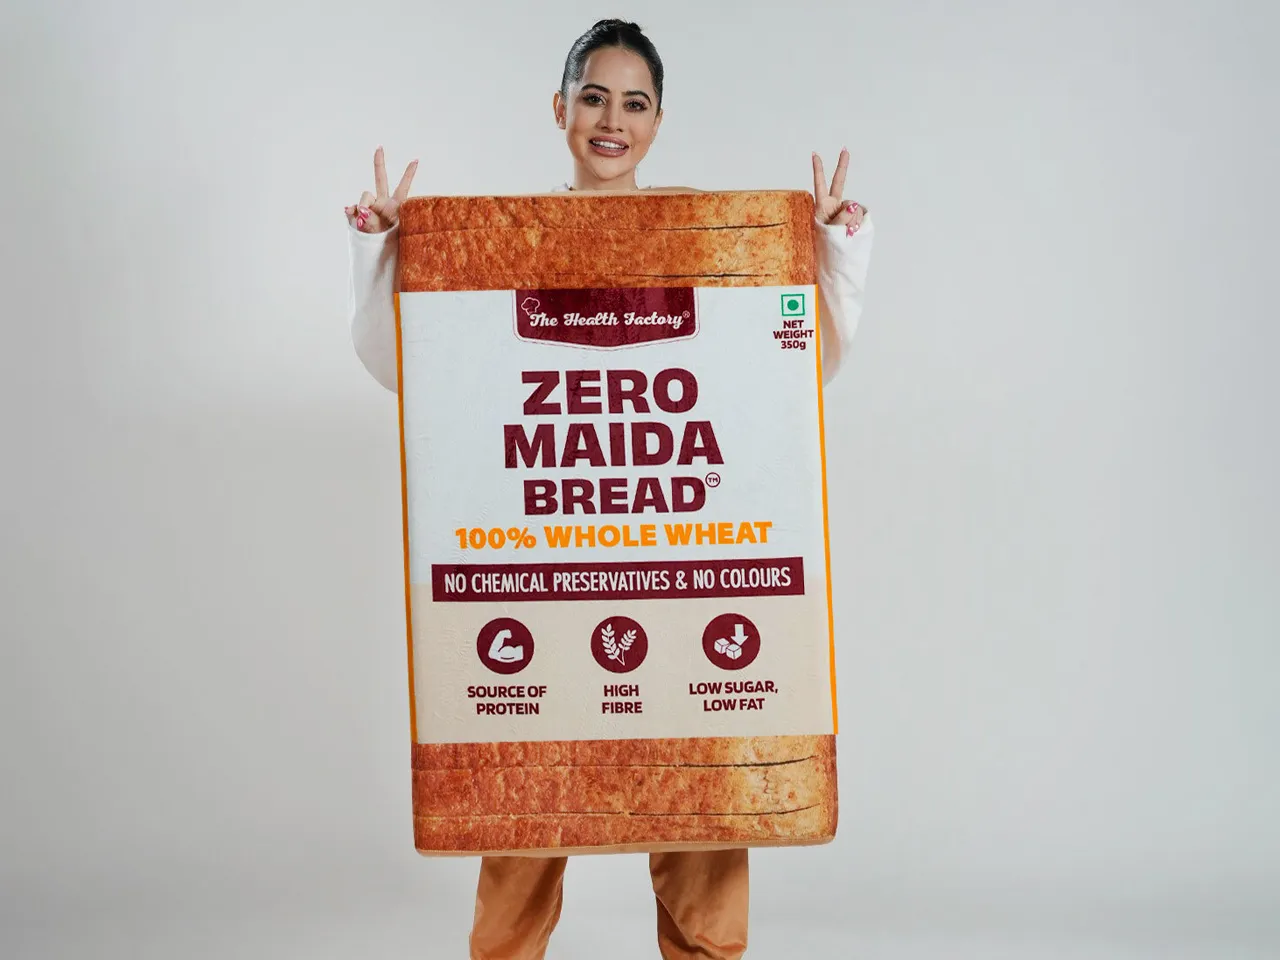 Uorfi Javed dresses up as bread for the collaboration with The Health Factory